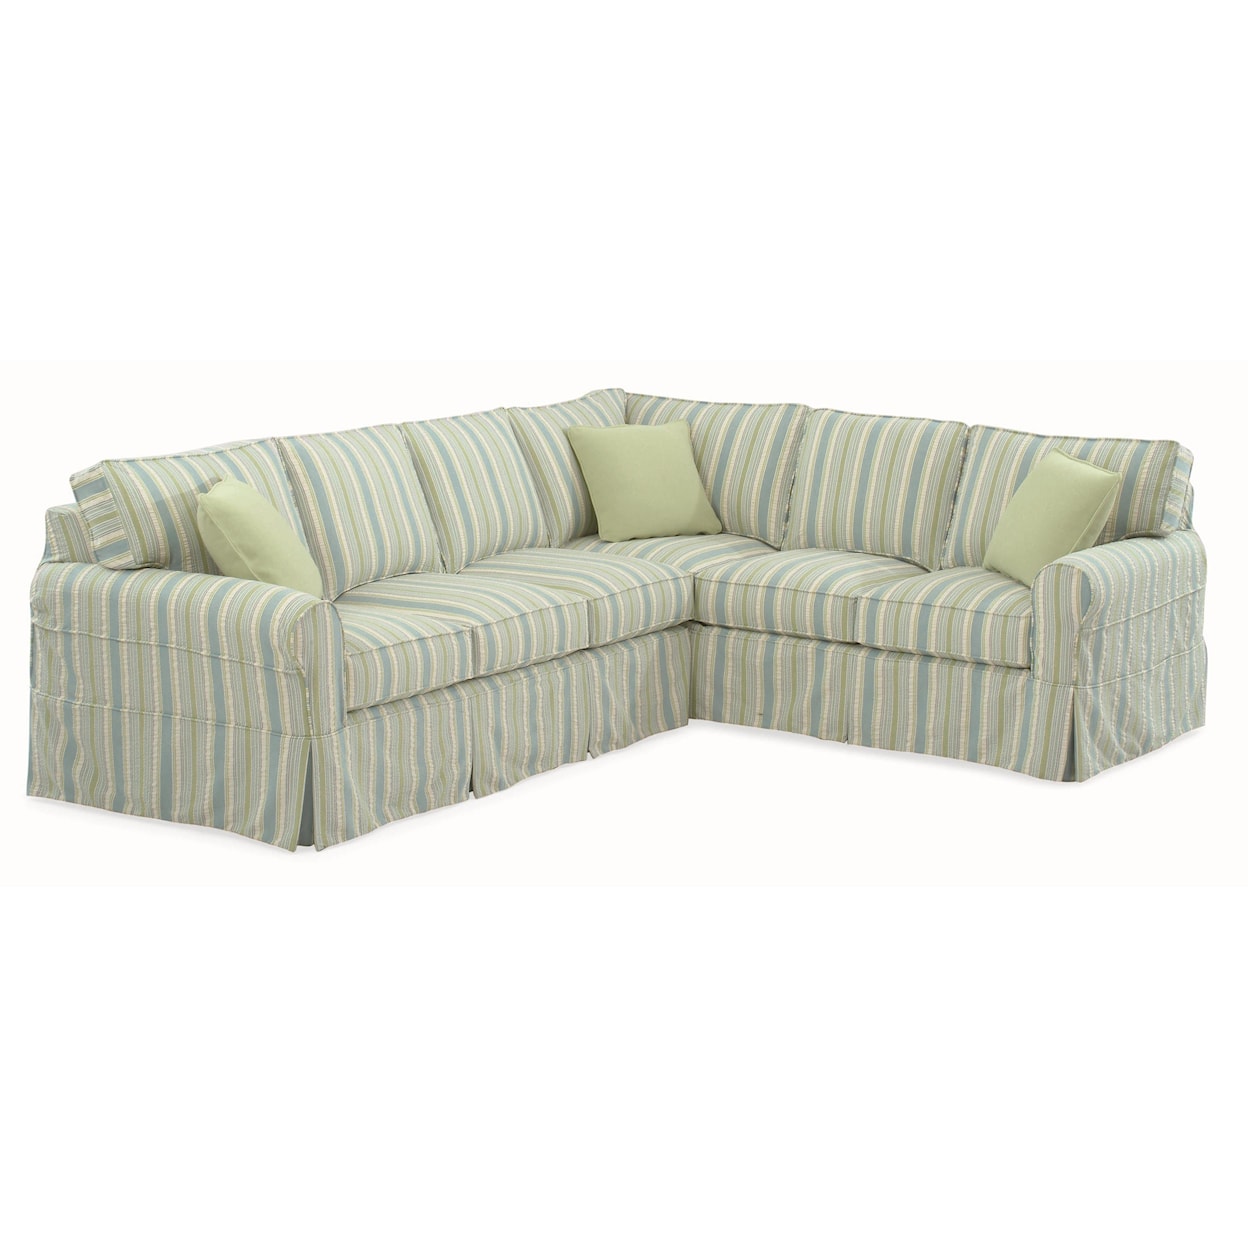 Braxton Culler 728 Sectional Sofa with Slipcover